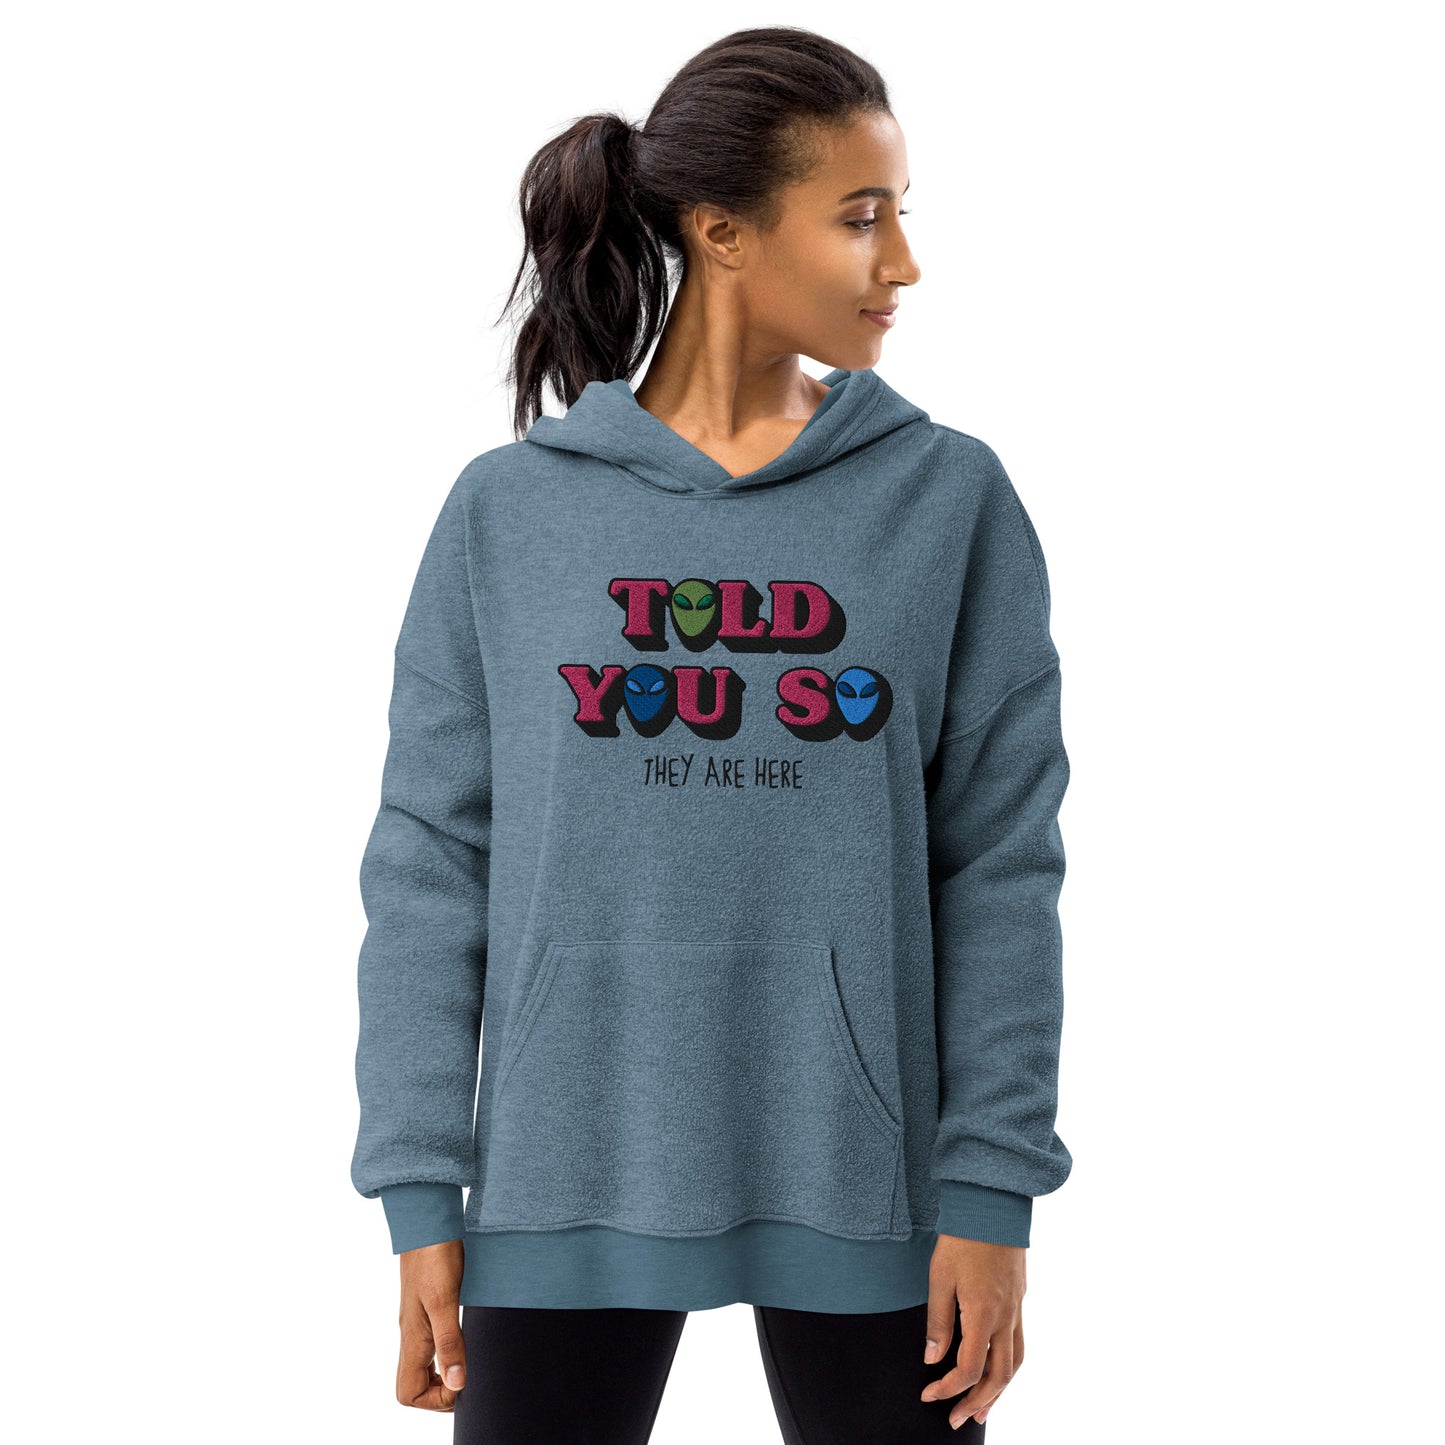 #WEIRDO | This sueded fleece hoodie for women has the conspiracy theory meme embroidered at the front of the fleece hoodie: TOLD YOU SO, THEY ARE HERE! If you believe Aliens are already amongst us, then this fleece hoodie might be for you!